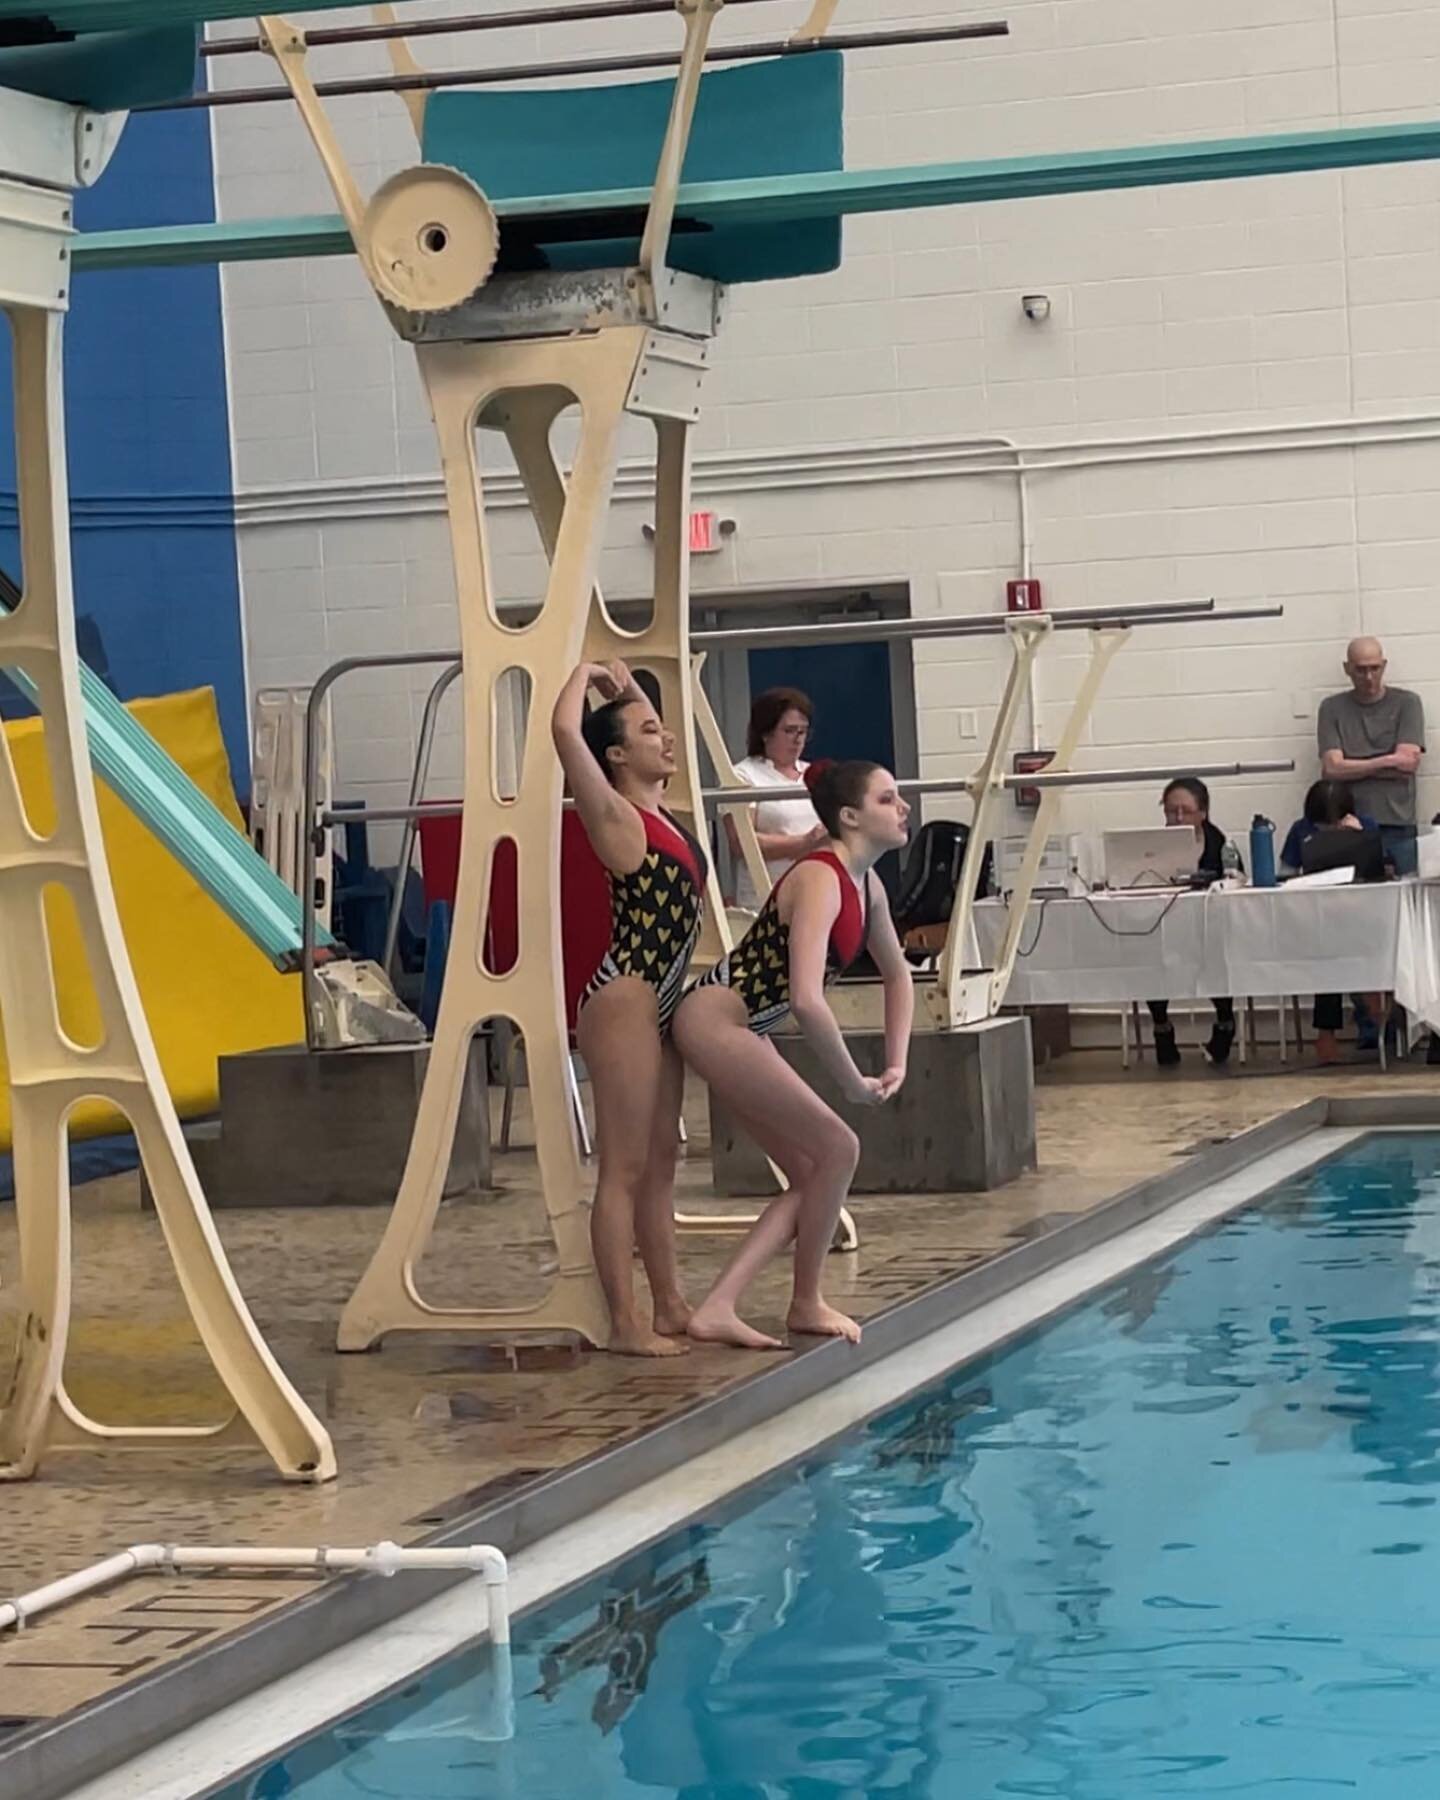 Congratulations to our juniors for completing their first meet of the season. Well done girls! 
&bull;
&bull;
&bull;
#imaginesynchro #usaartisticswimming #synchronizedswimming #nyc #imagineswimming #eastzonesynchro